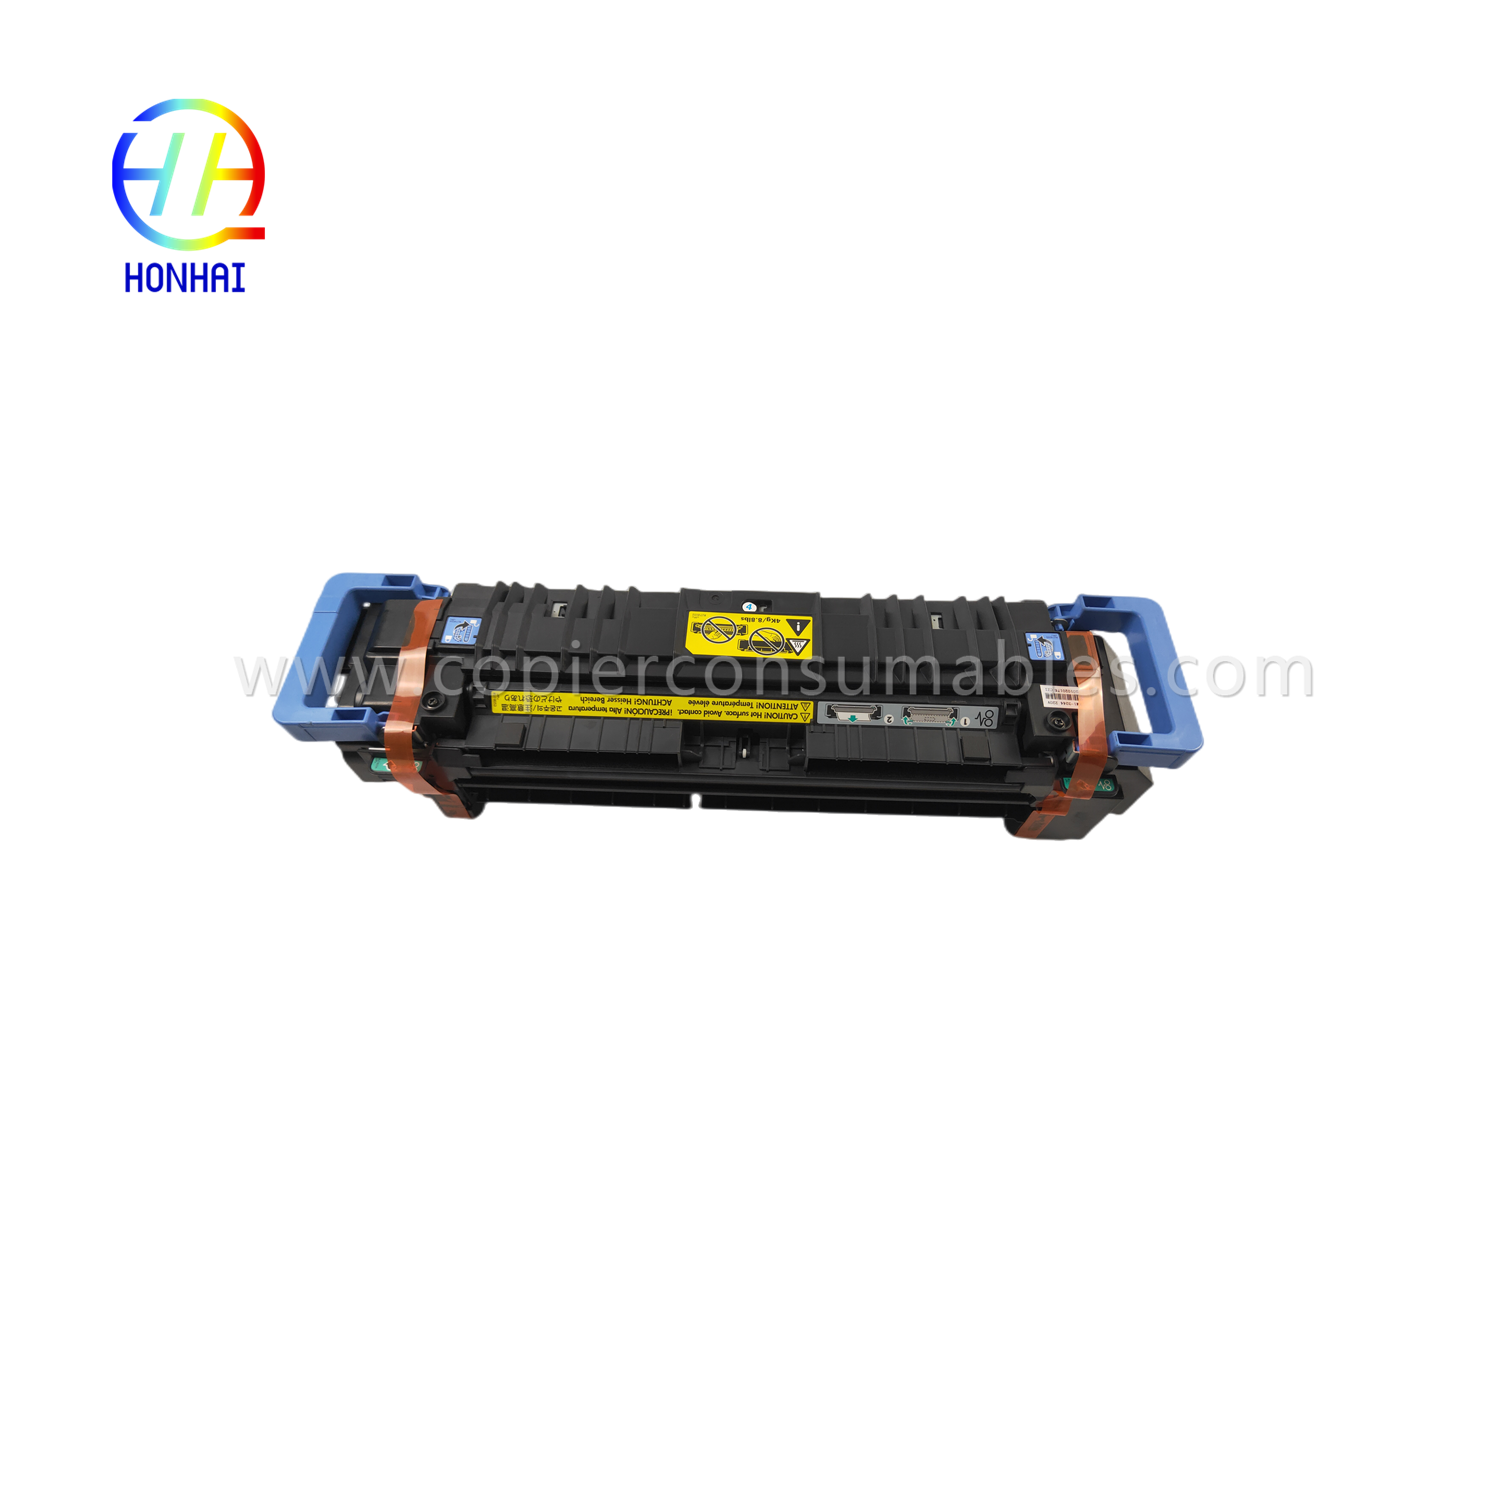 https://www.copierconsumables.com/fuser-assembly-unit-for-hp-m855-m880-m855dn-m855xh-m880z-m880z-c1n54-67901-c1n58-67901-fusing-heating-product/